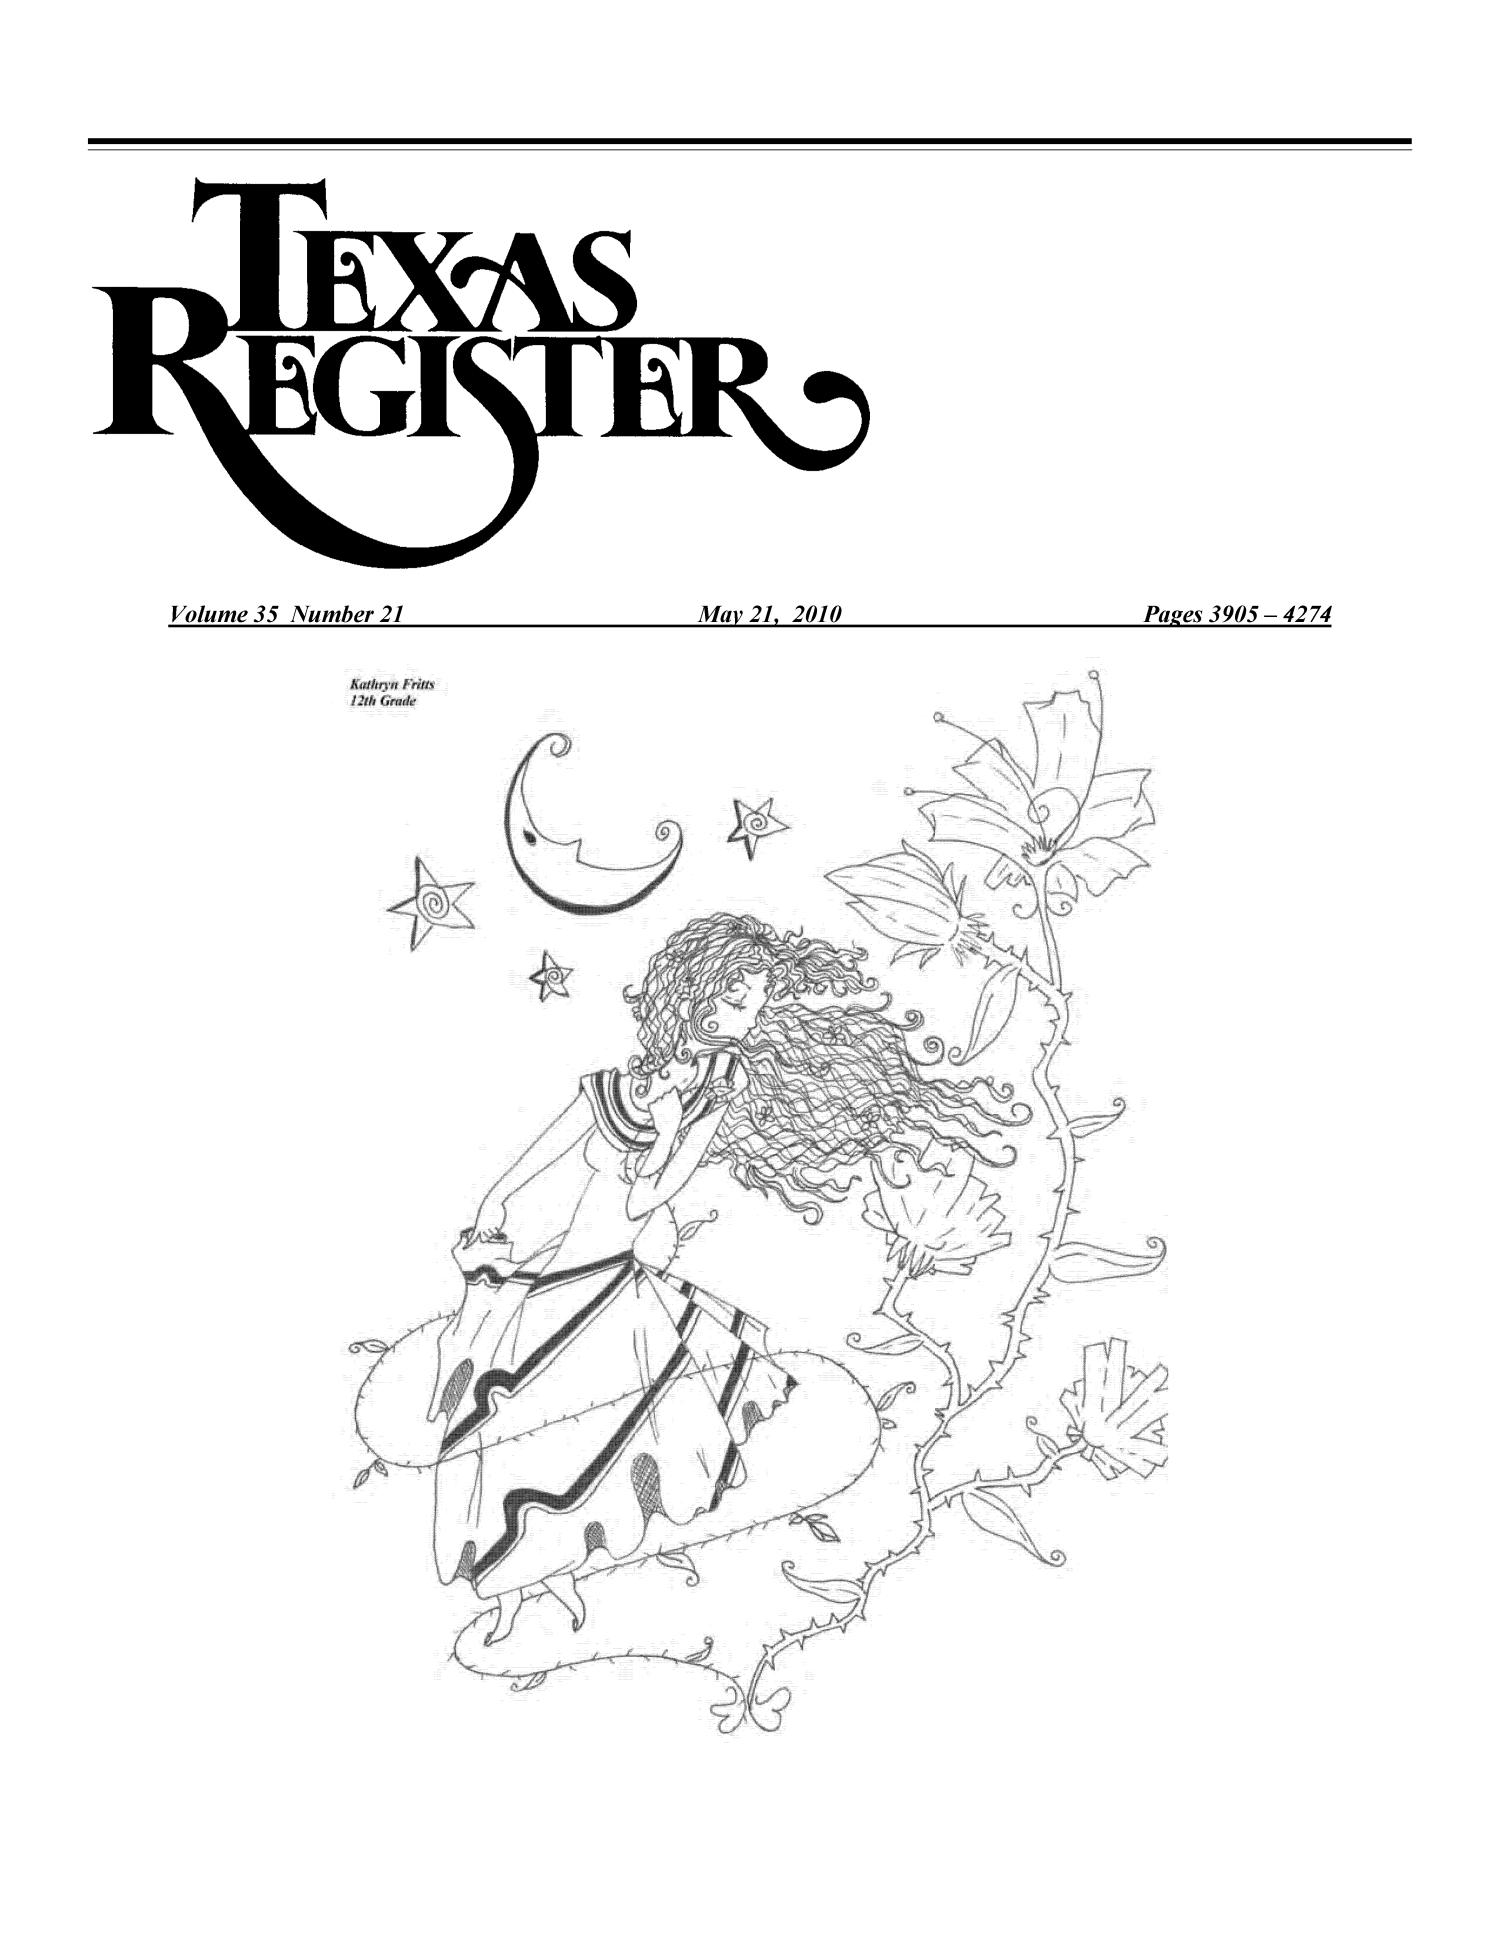 Texas Register, Volume 35, Number 21, Pages 3905-4274, May 21, 2010
                                                
                                                    3905
                                                